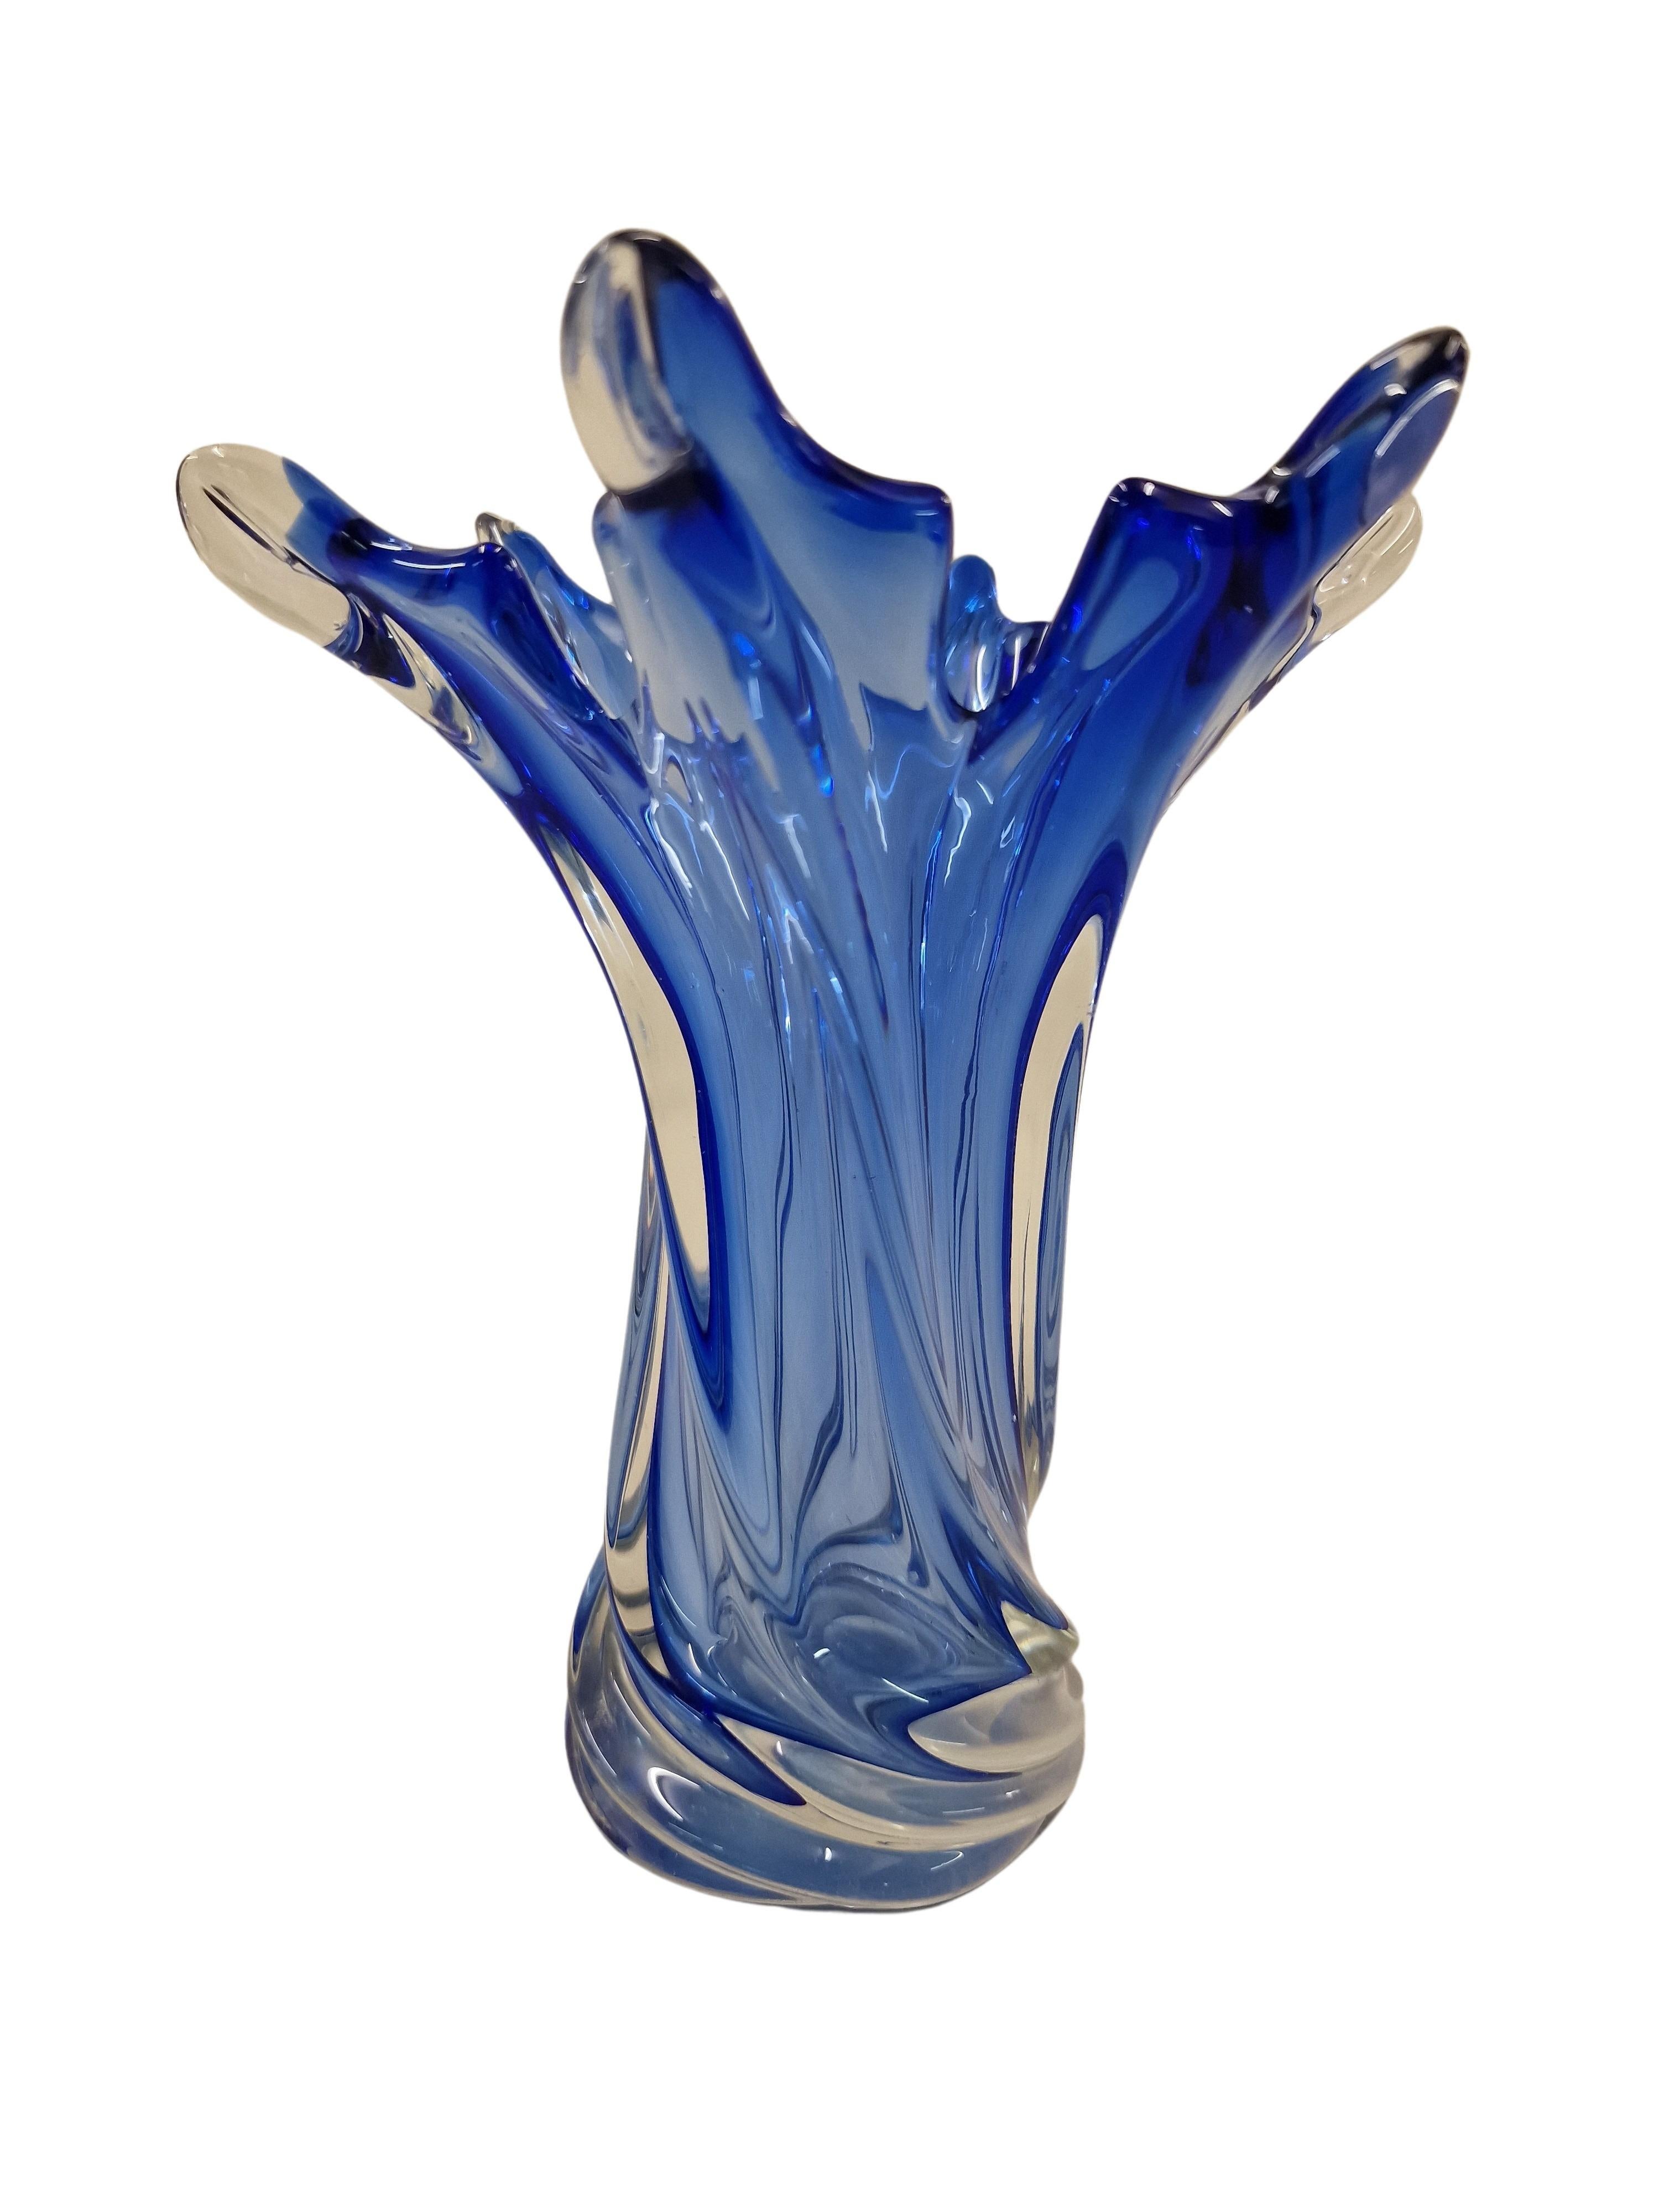 Very decorative star-shaped flower vase in a beautiful blue colour, made in the famous center of art glass, mouth-blown glass, Murano, Venice, Italy, made in the 1970s. 

The vase has a wonderful shape - impressivly made, high craftmenship. The